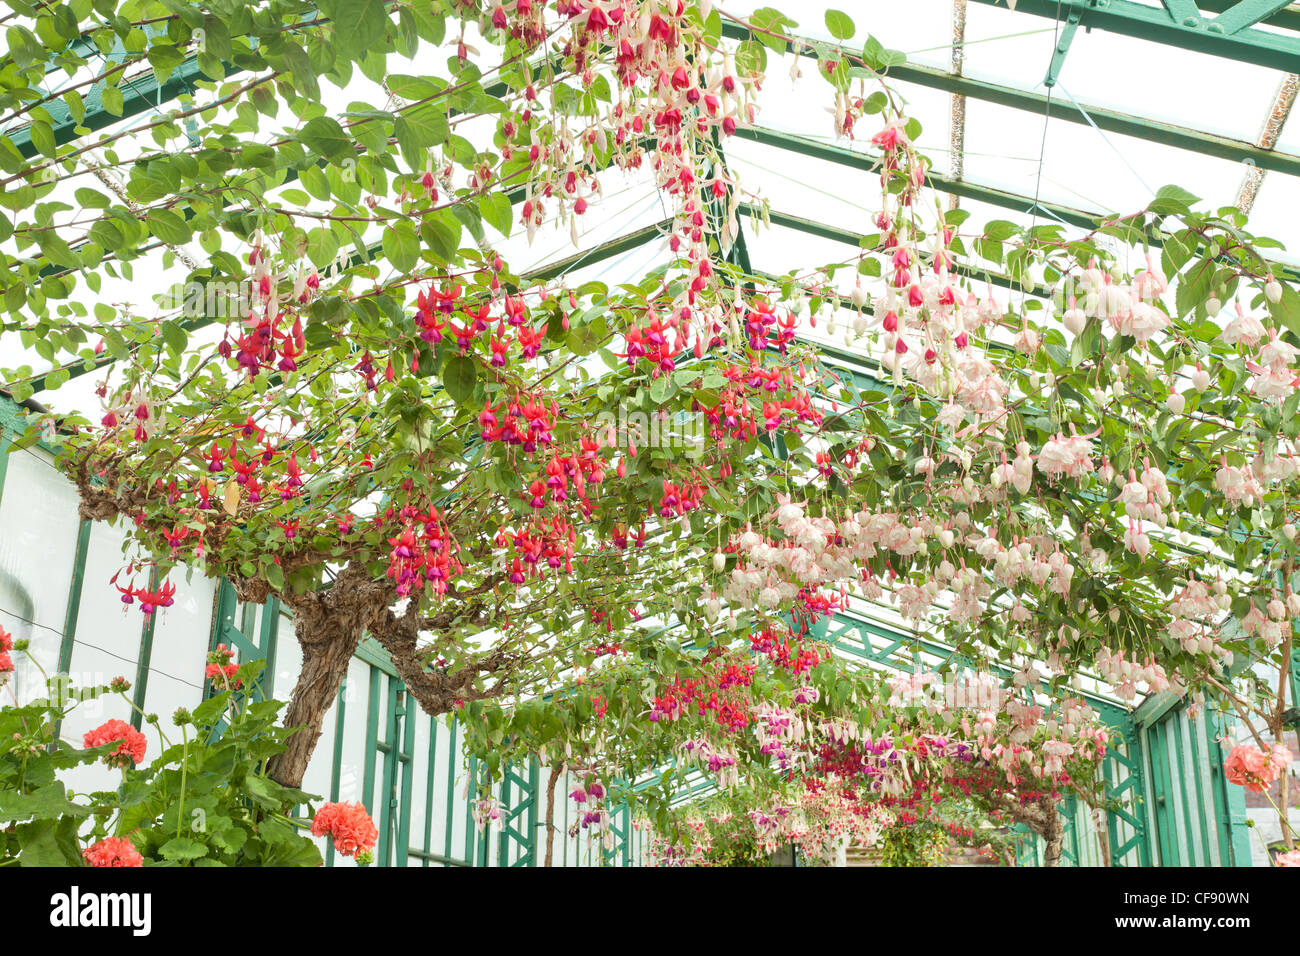 Belgium, Brussels, Laeken, the royal castle domain, the greenhouses of Laeken in spring. Long greenhouses with large Fuchsia. Stock Photo